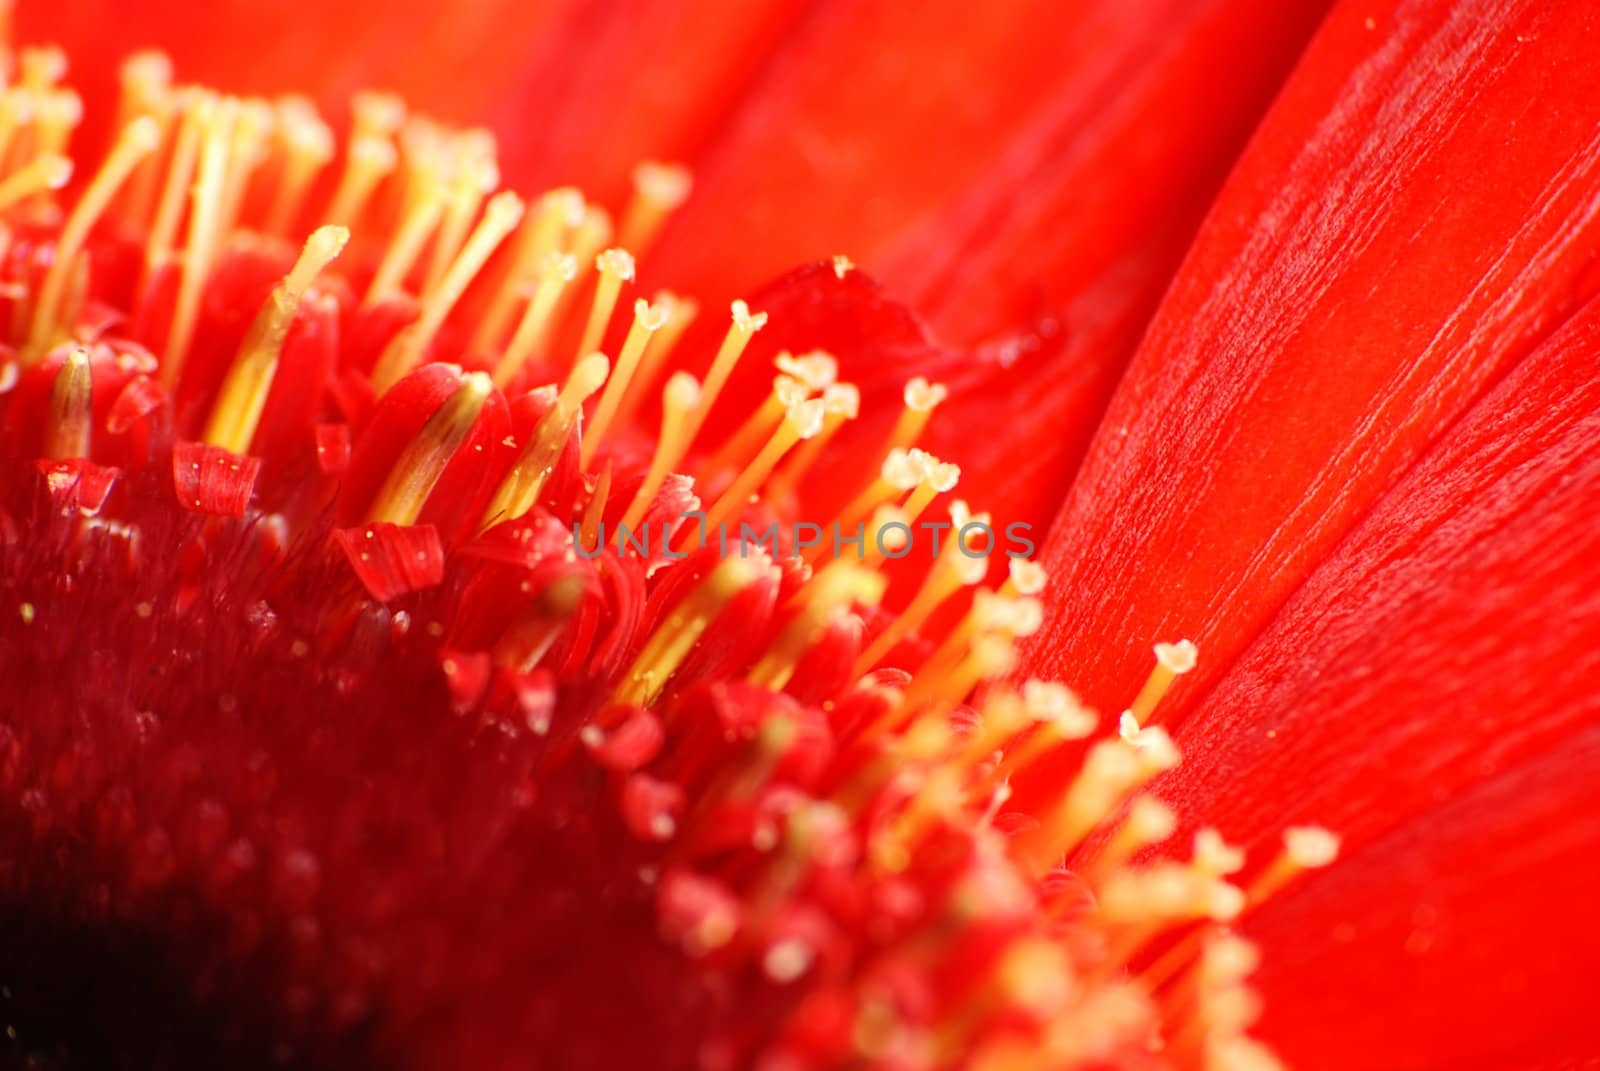 Macro view of a red colour daisy flower